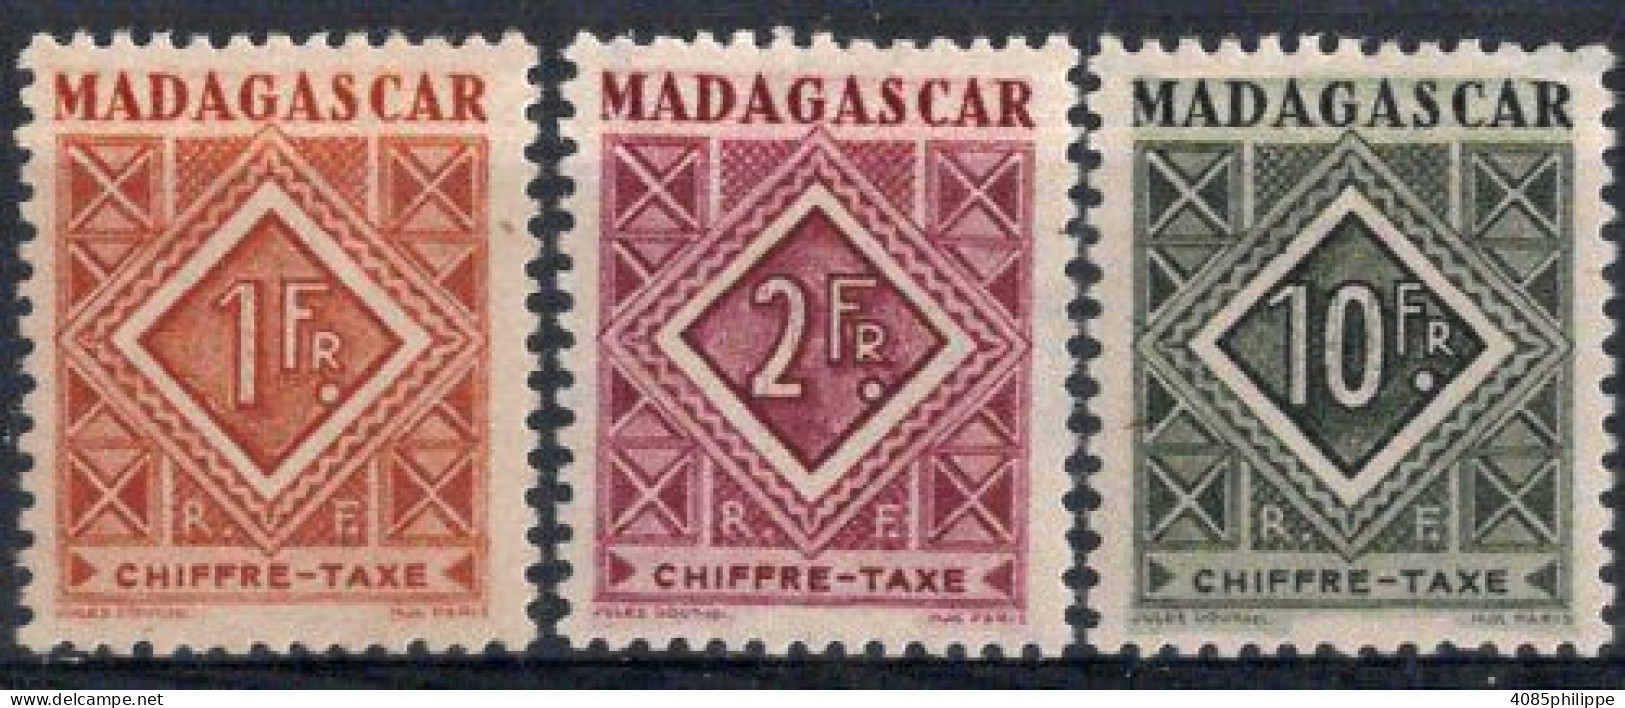 MADAGASCAR Timbres-Taxe N°34*,35* & 39* Neufs Charnières TB  cote : 2€50 - Timbres-taxe